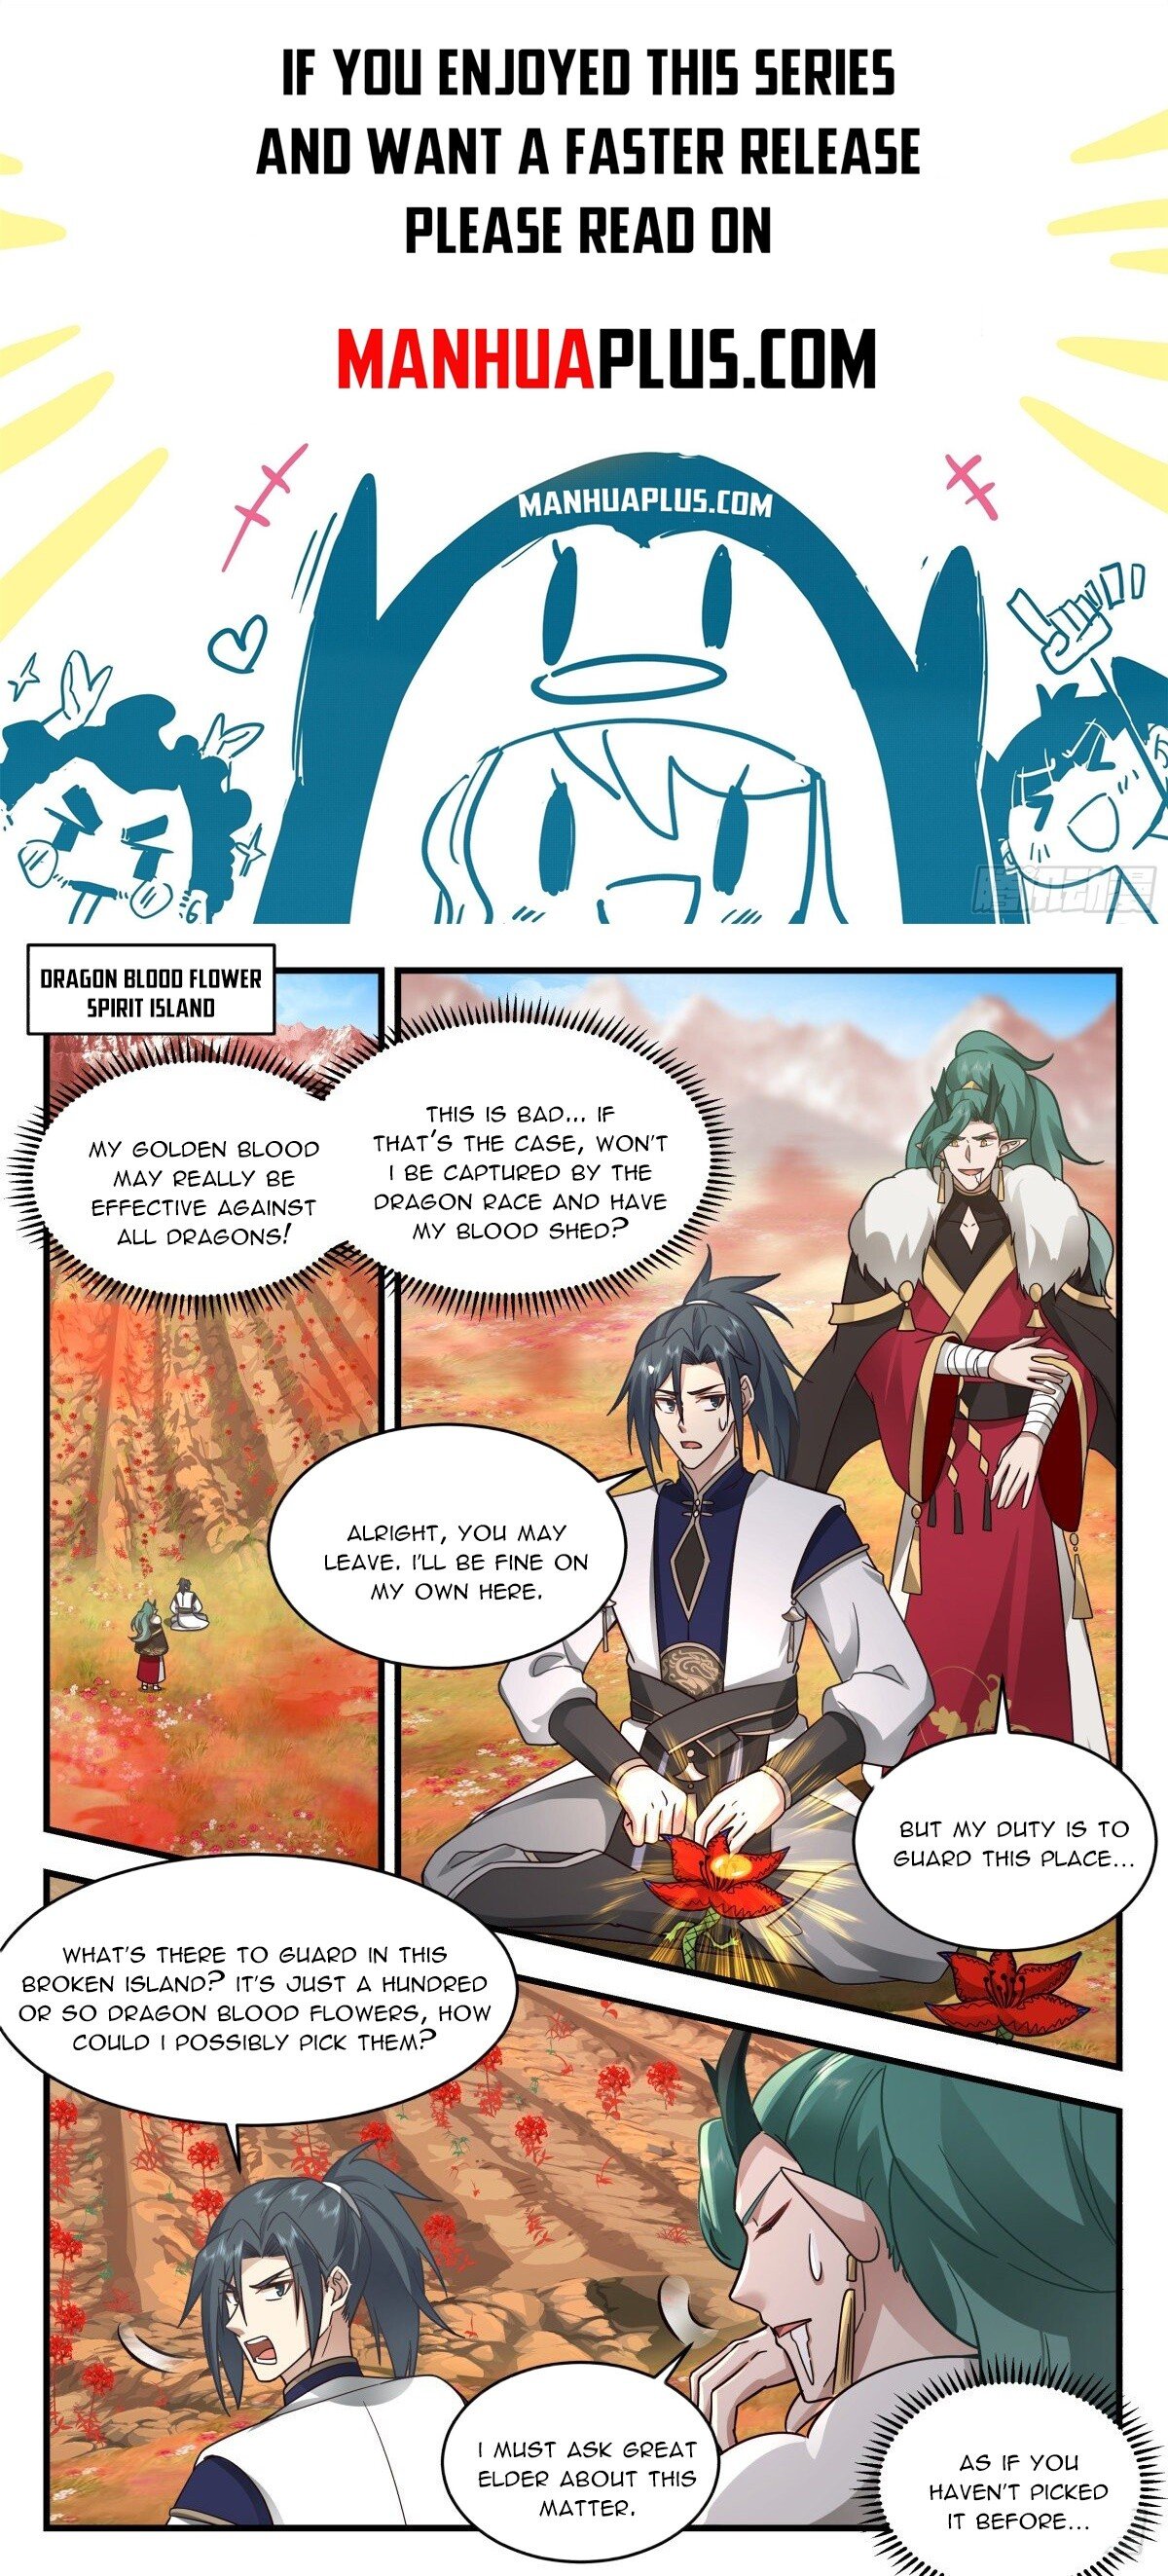 Martial Peak - Chapter 14907 - Go back on one's word - Image 1